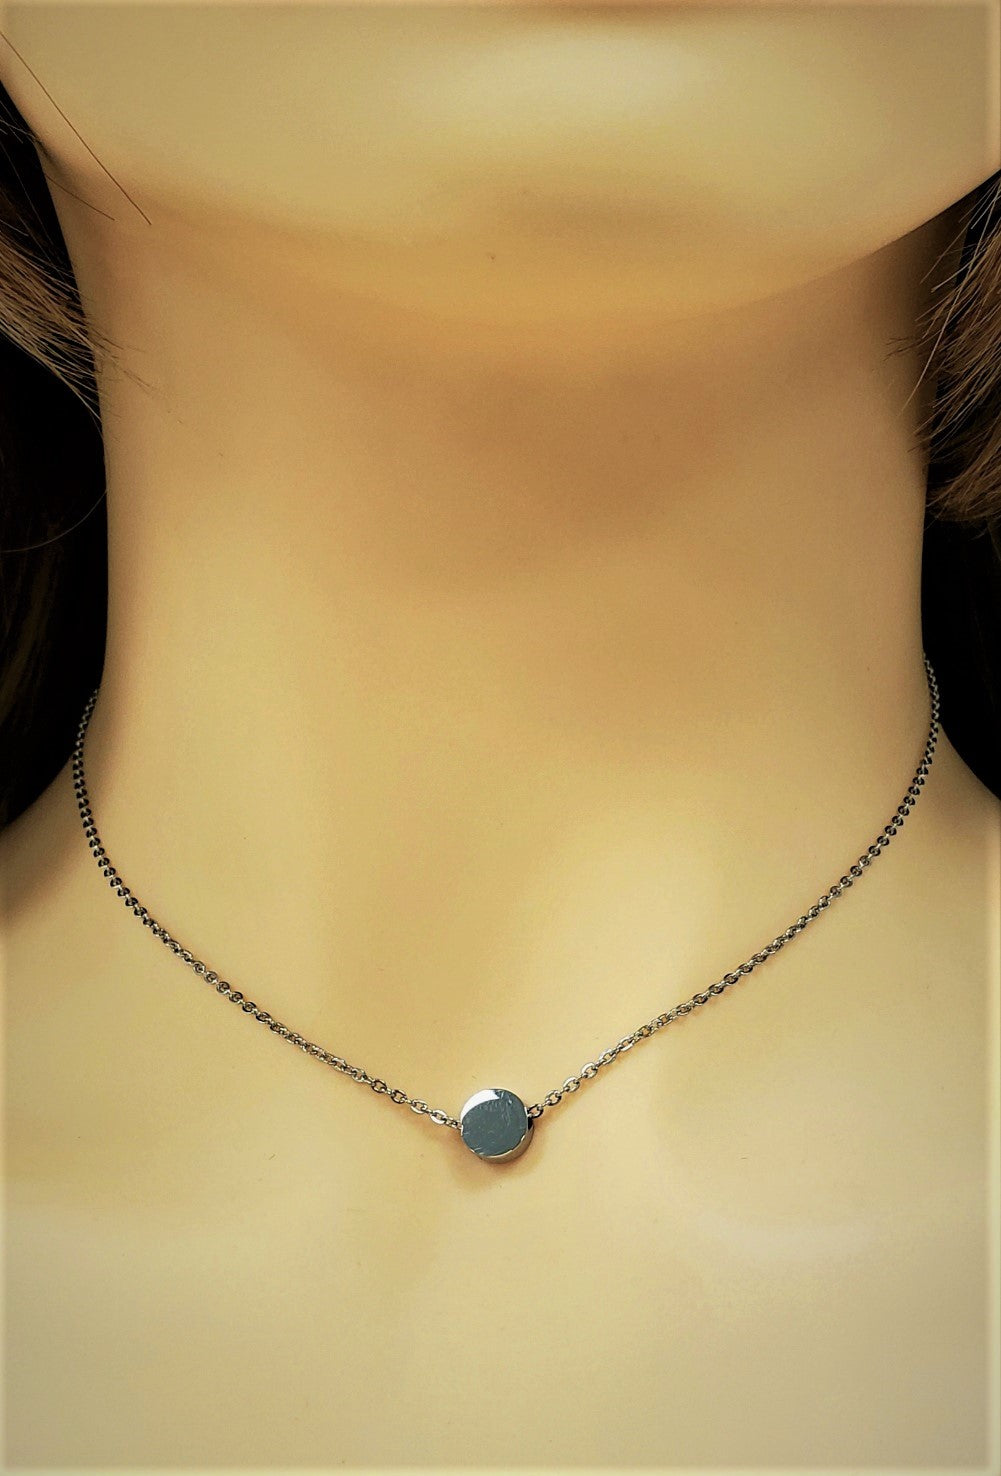 Stainless steel necklace - SN098